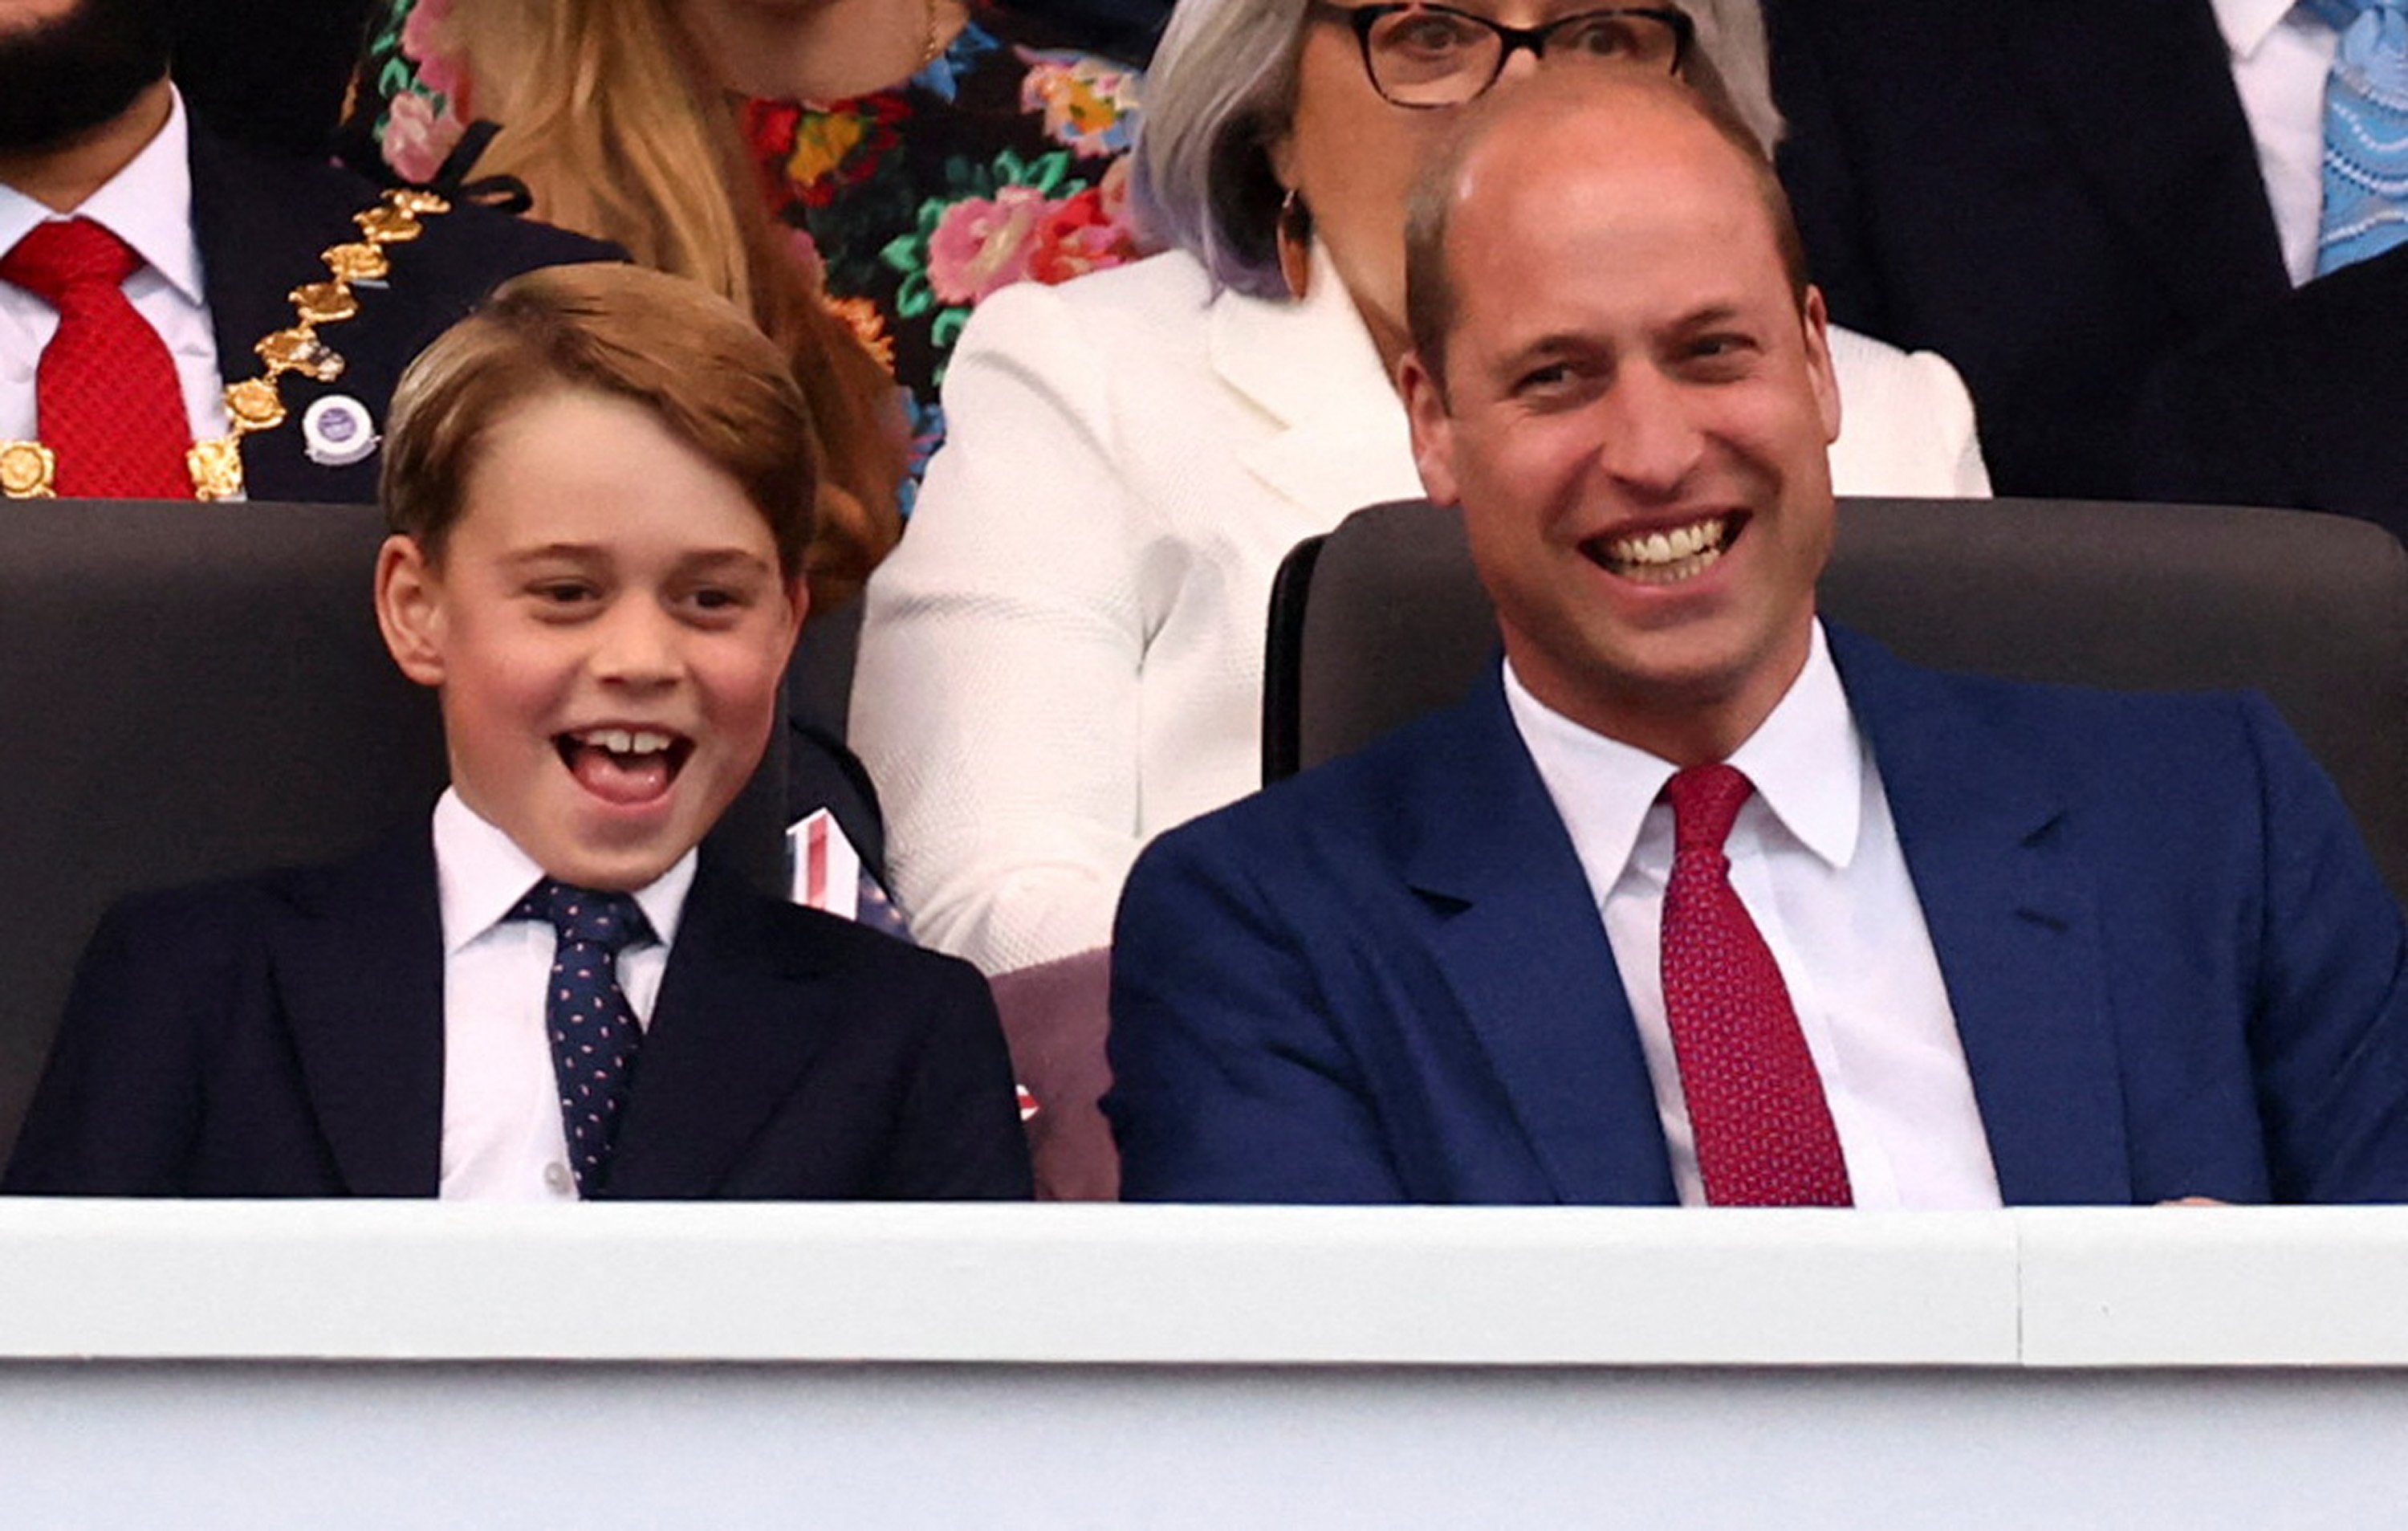 Prince George of Cambridge and Prince William during the Platinum Party At The Palace at Buckingham Palace on June 4, 2022 in London, England | Source: Getty Images